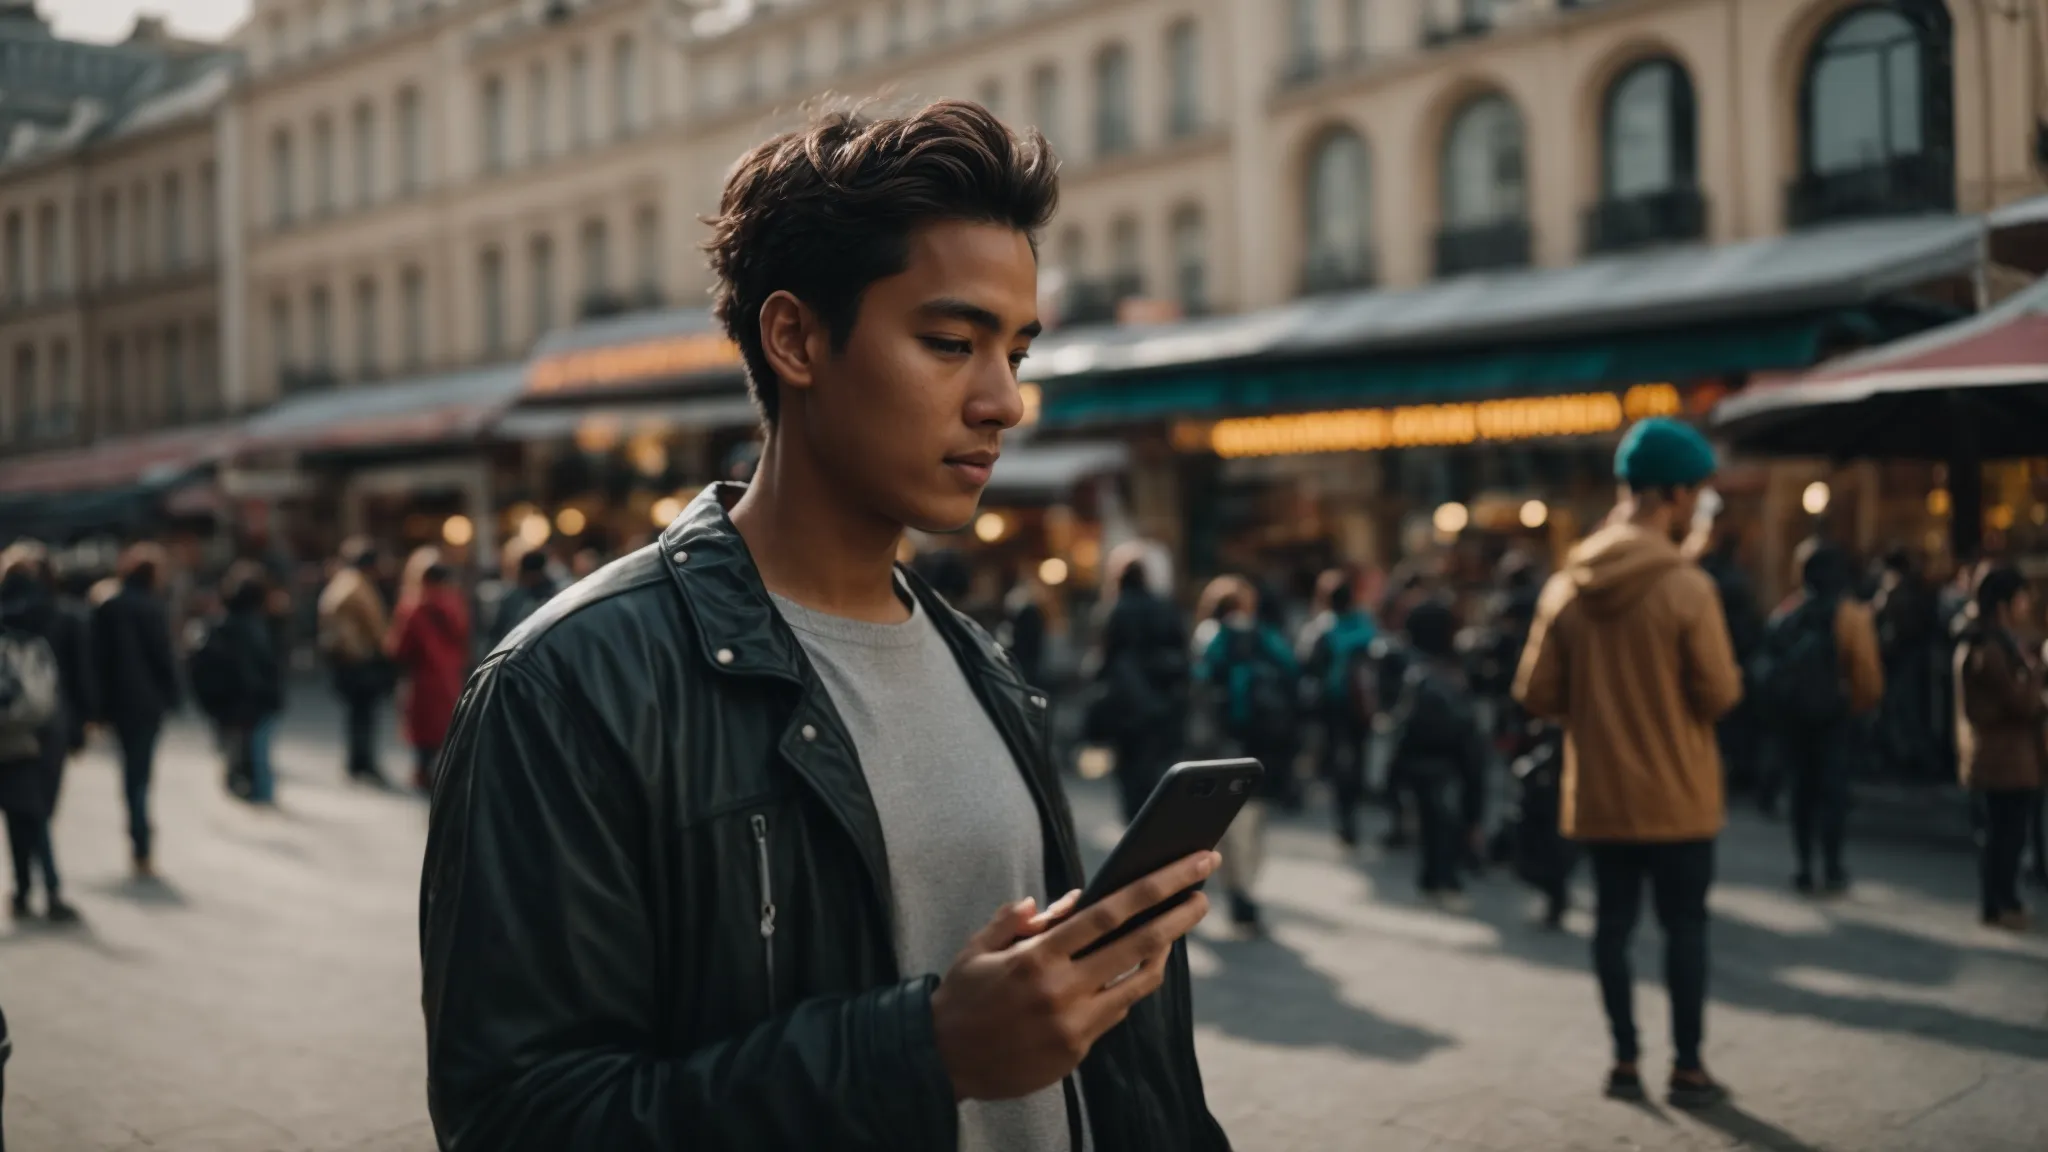 a content creator stands in a bustling city square, smartphone in hand, capturing and editing vibrant scenes.